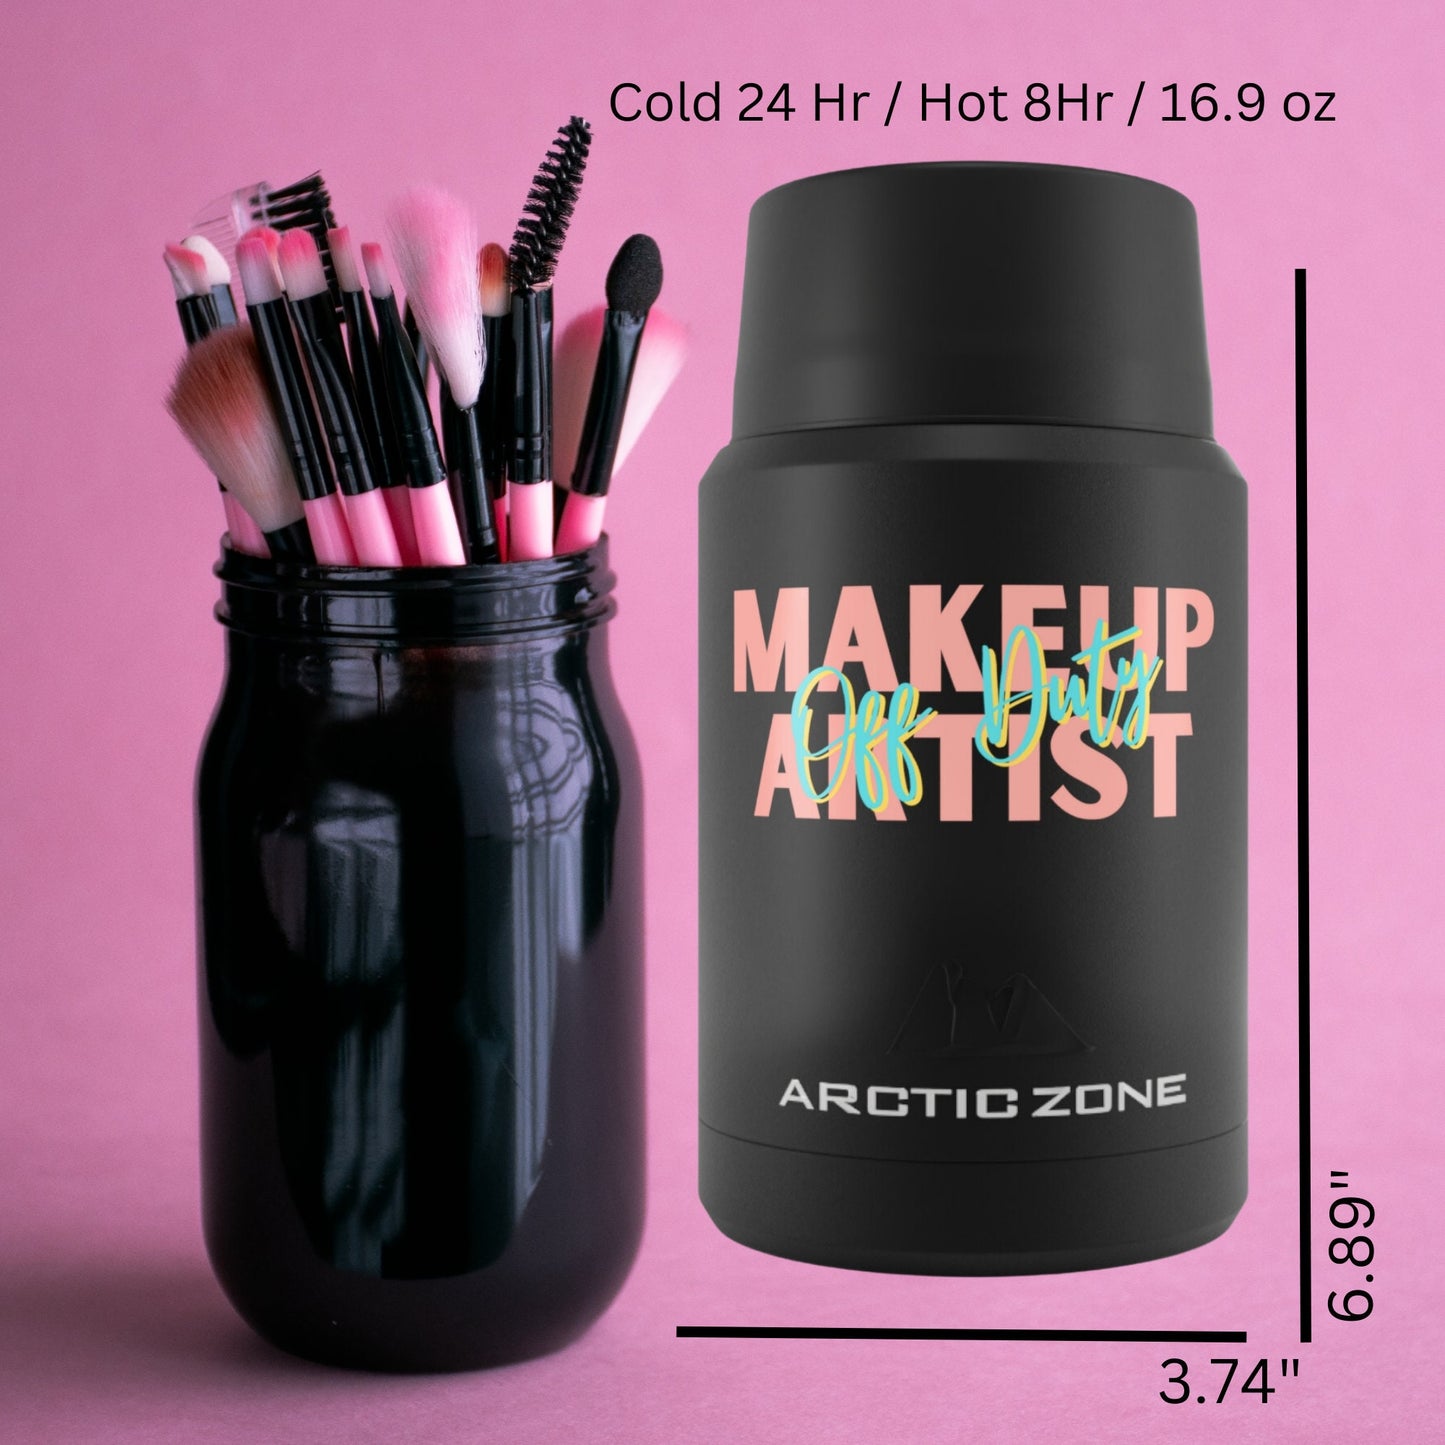 Makeup Artist Insulated Copper Travel Hot Cold 24 Hour Food Drink Storage Camping Cooler Cup Mug MUA Pro Artist Paint Liquid Container Gift